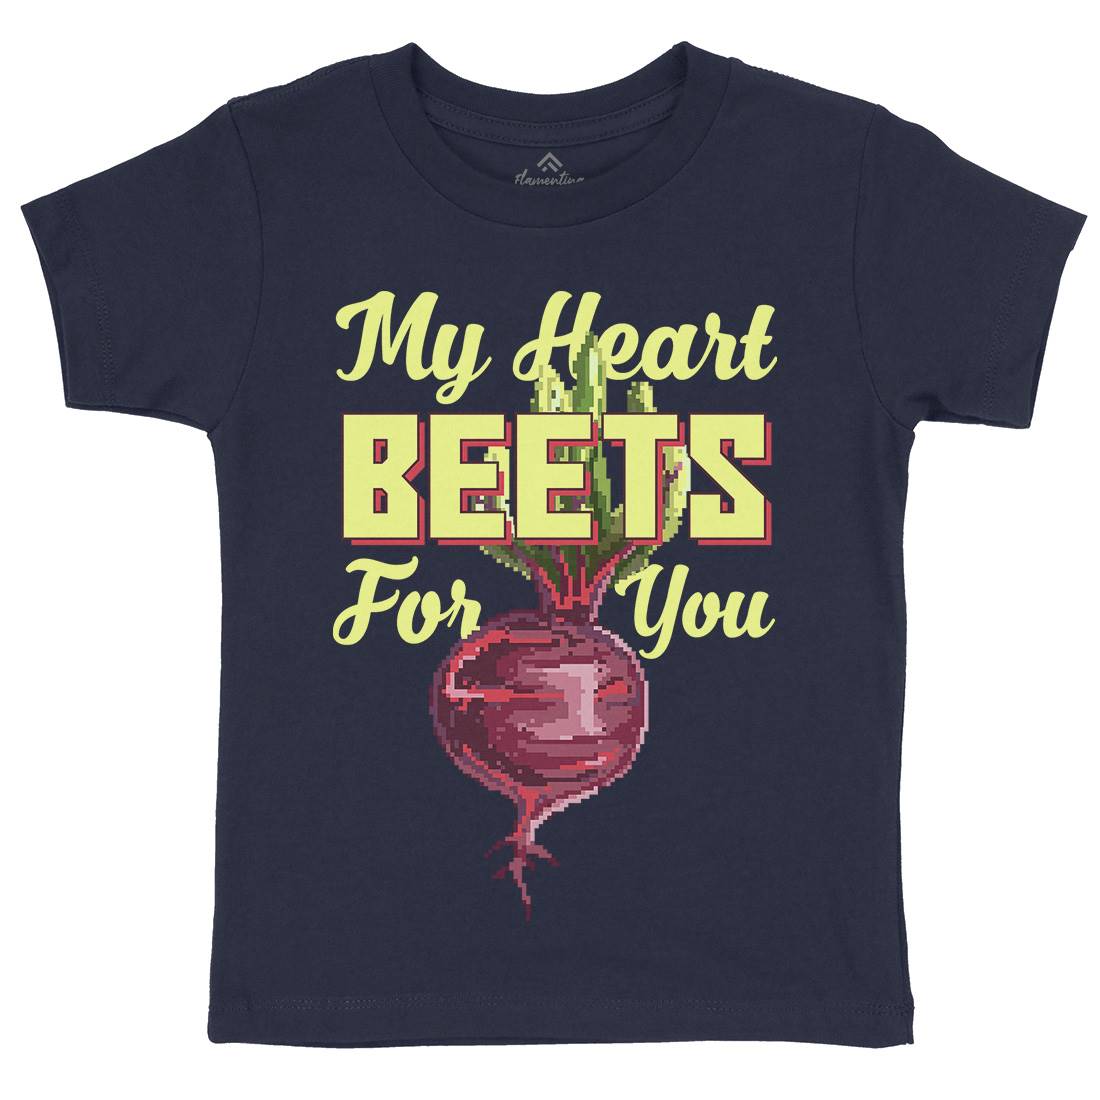 My Heart Beets For You Kids Crew Neck T-Shirt Food B937